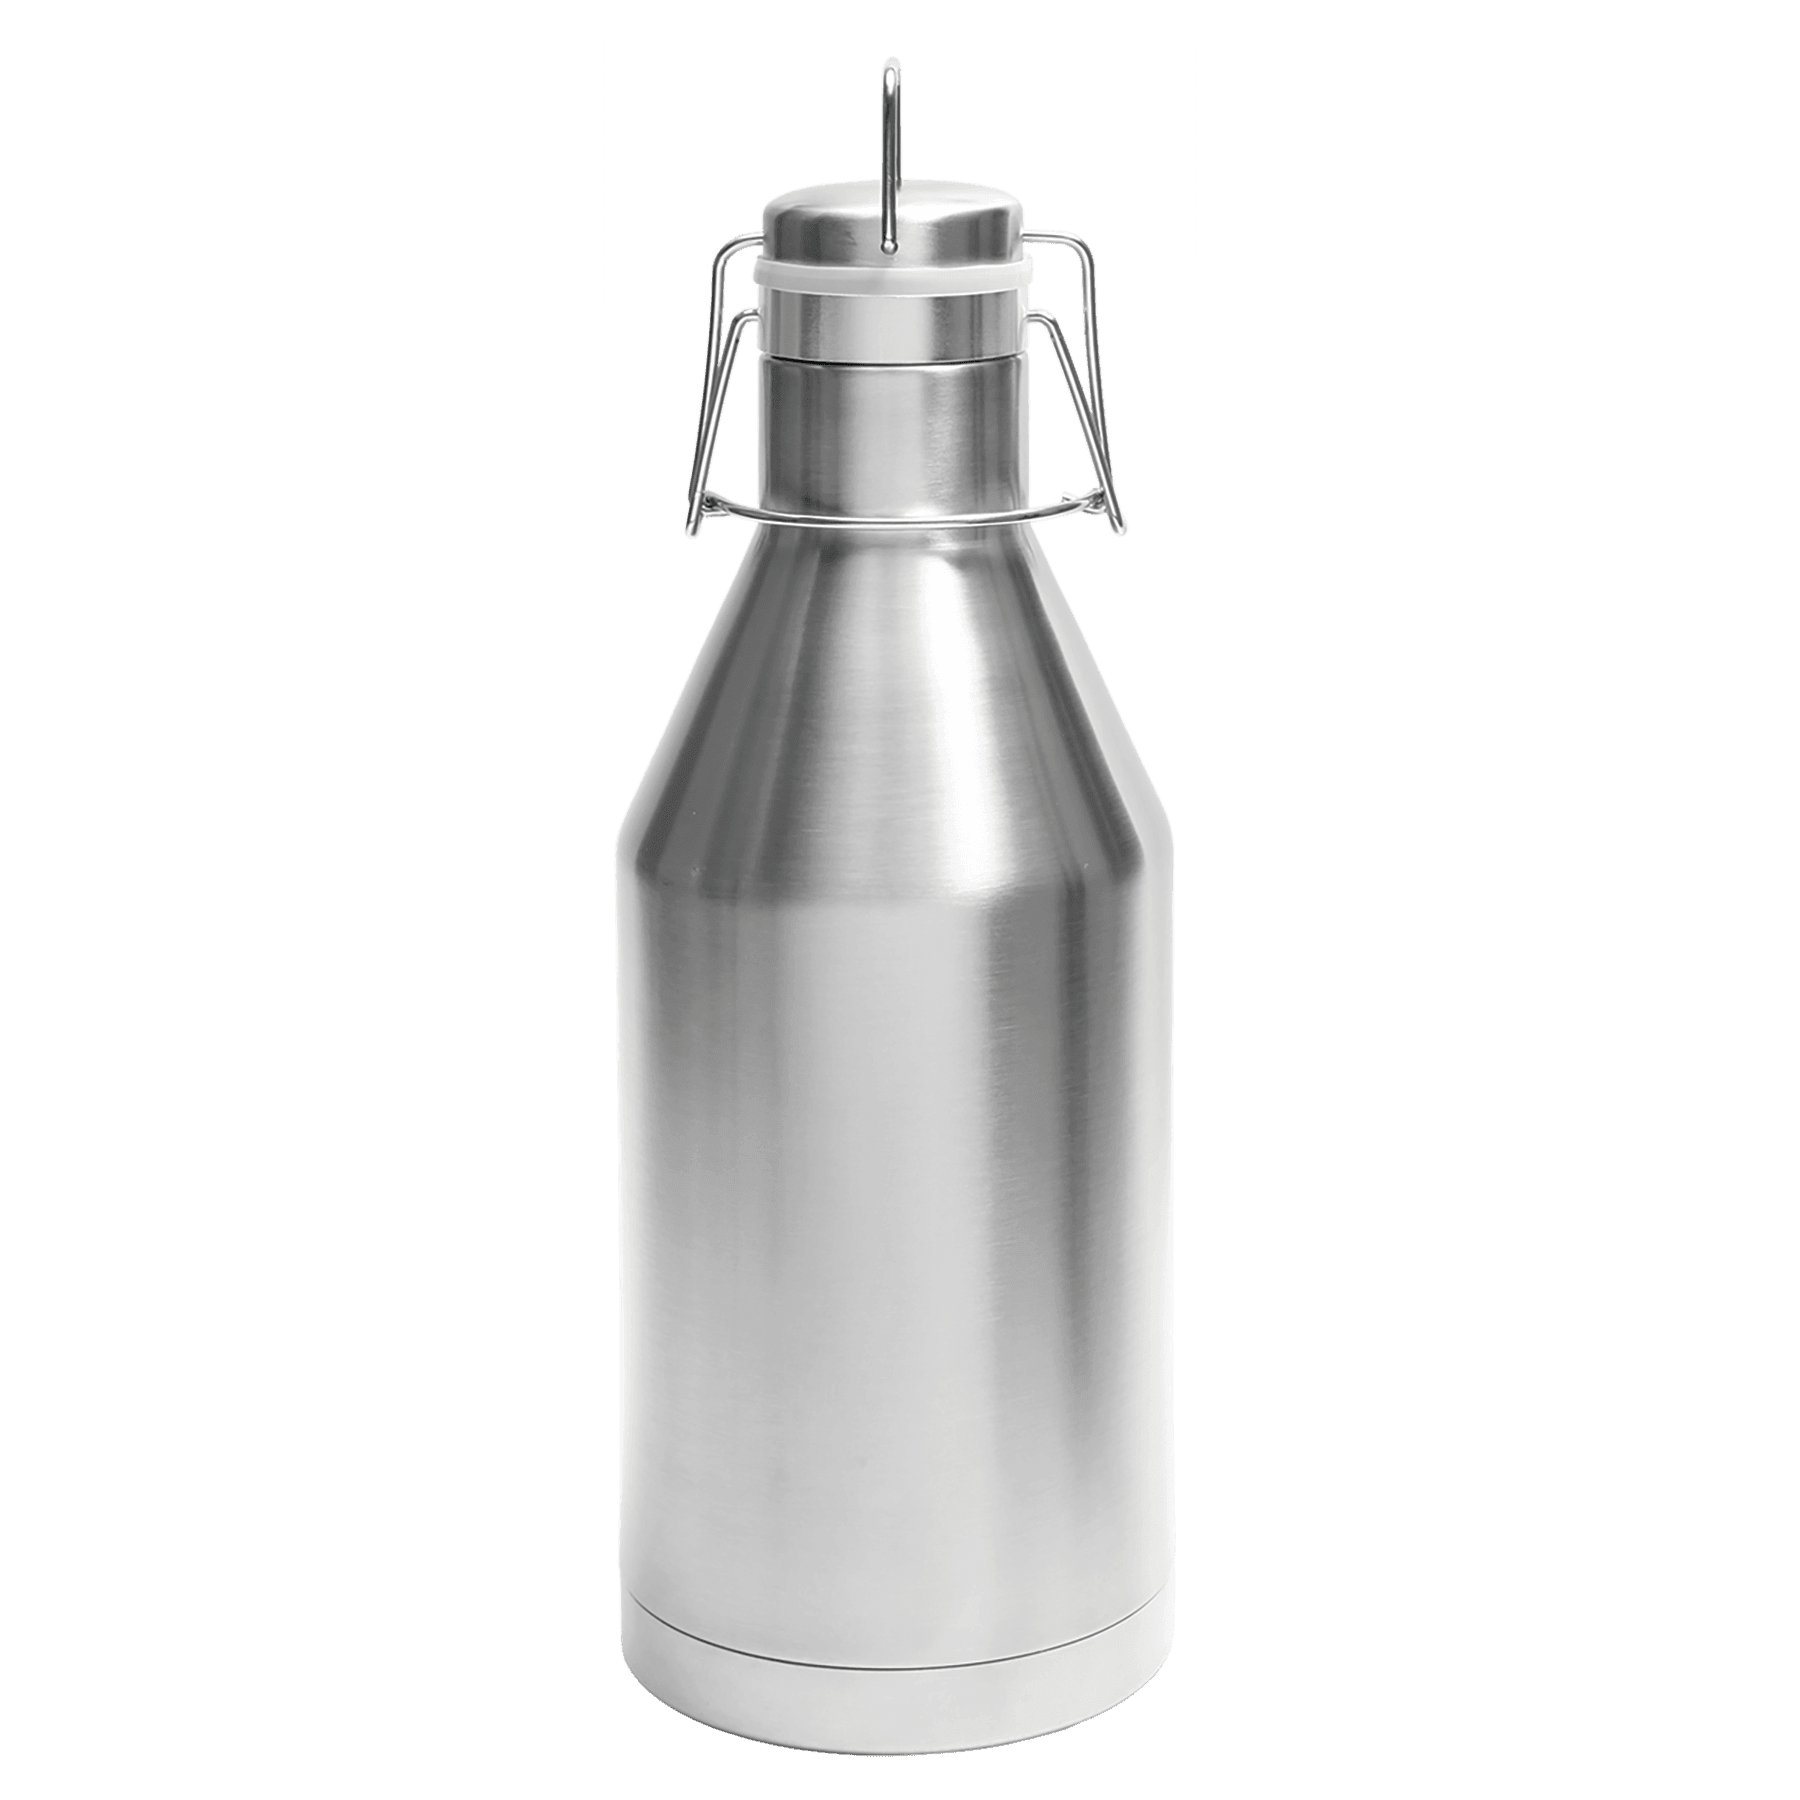 64oz Vacuum Insulated Growler with Custom Engraving by Polar Camel - The Rutile Ltd